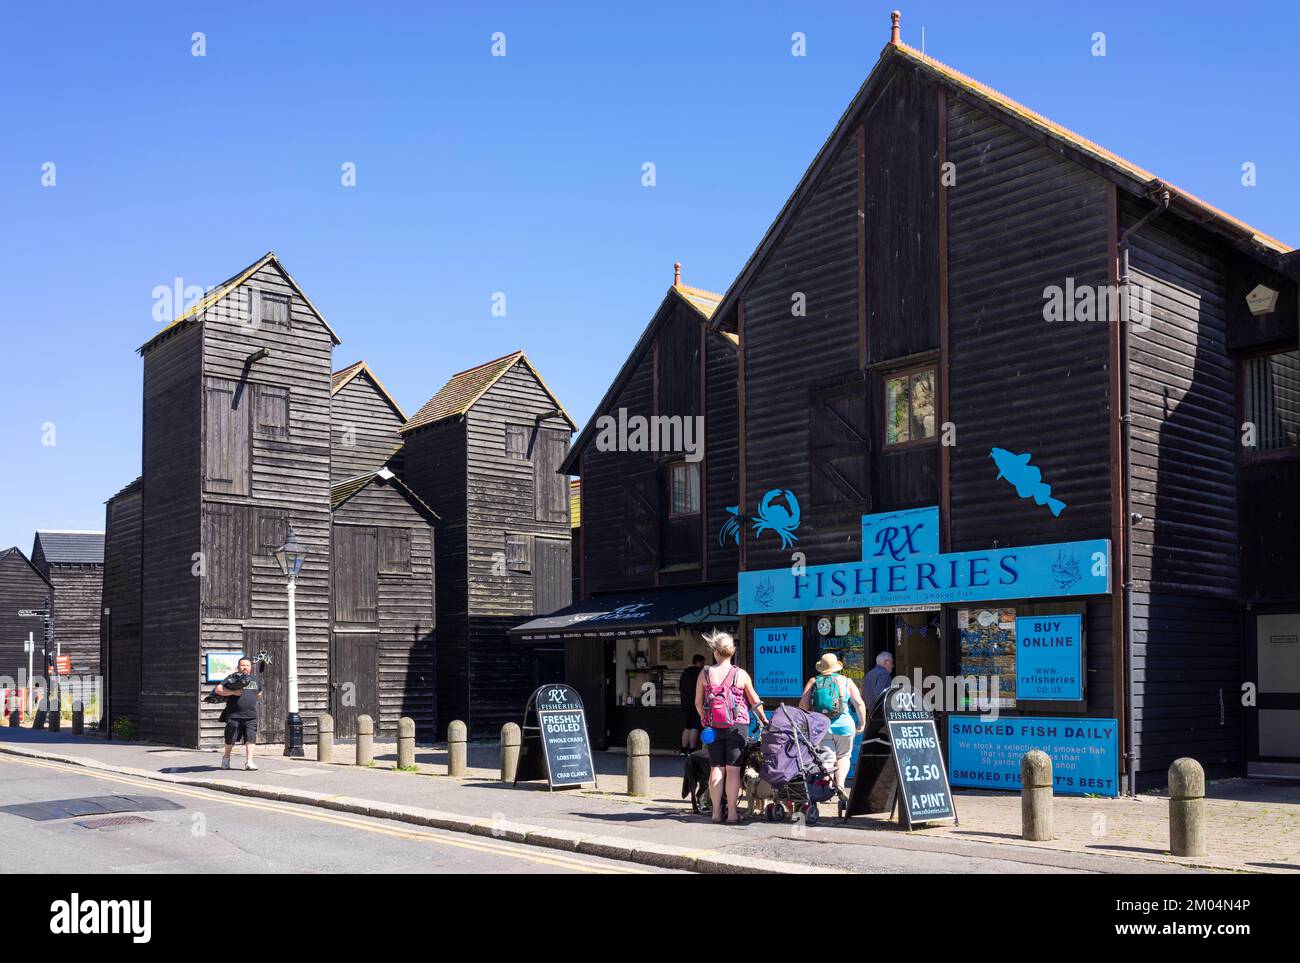 Hastings Old Town Fisheries on the Stade avec des huttes traditionnelles en filet peint noir Hasting's Net Shops Hastings East Sussex Angleterre GB Europe Banque D'Images